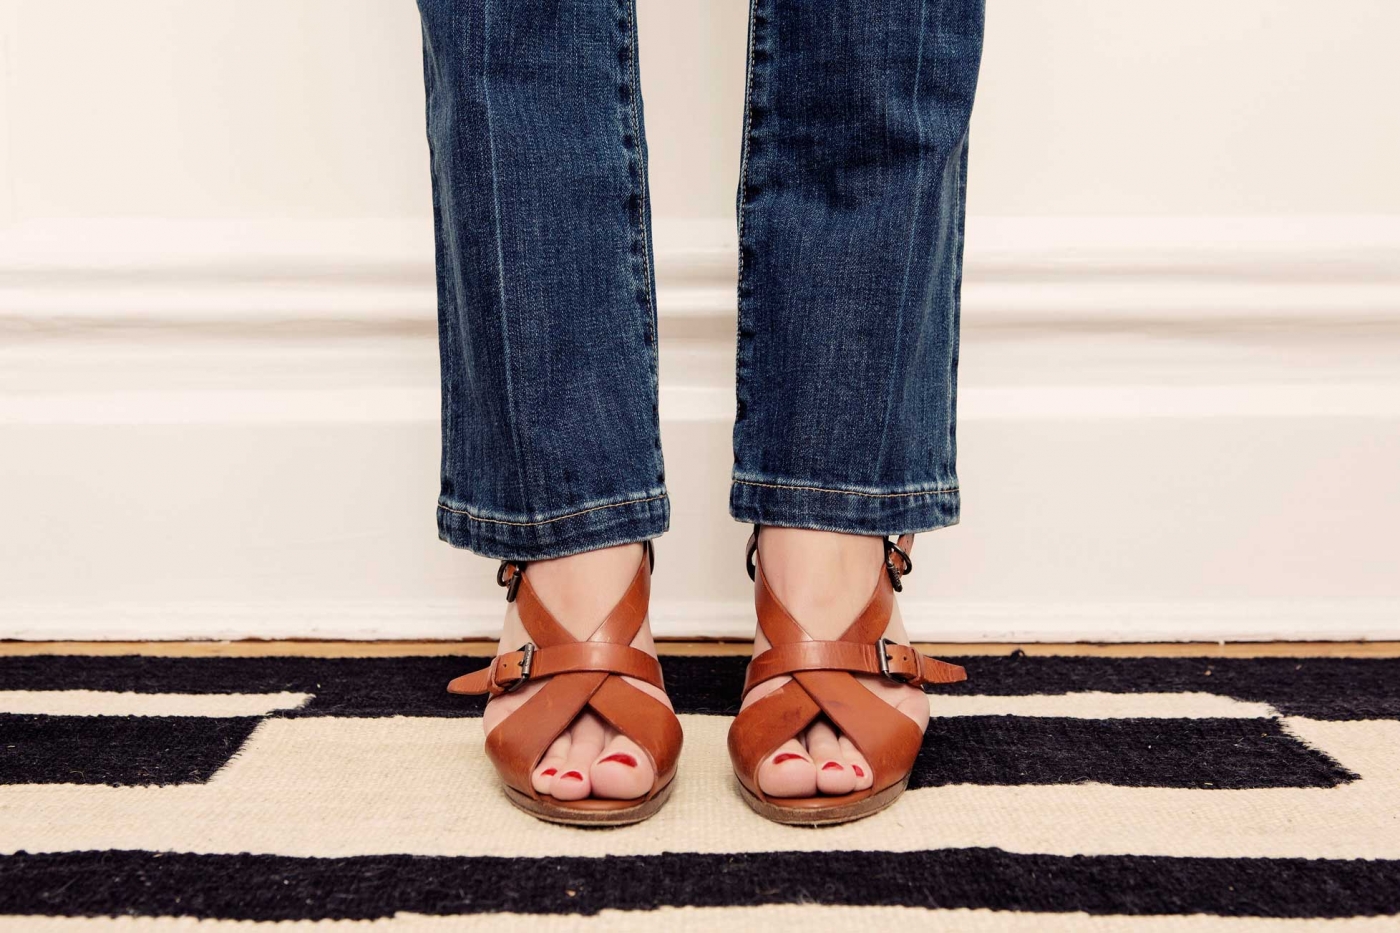 Jean of the Week: Alexa Chung for AG's Revolution Crop - Jean STORIES